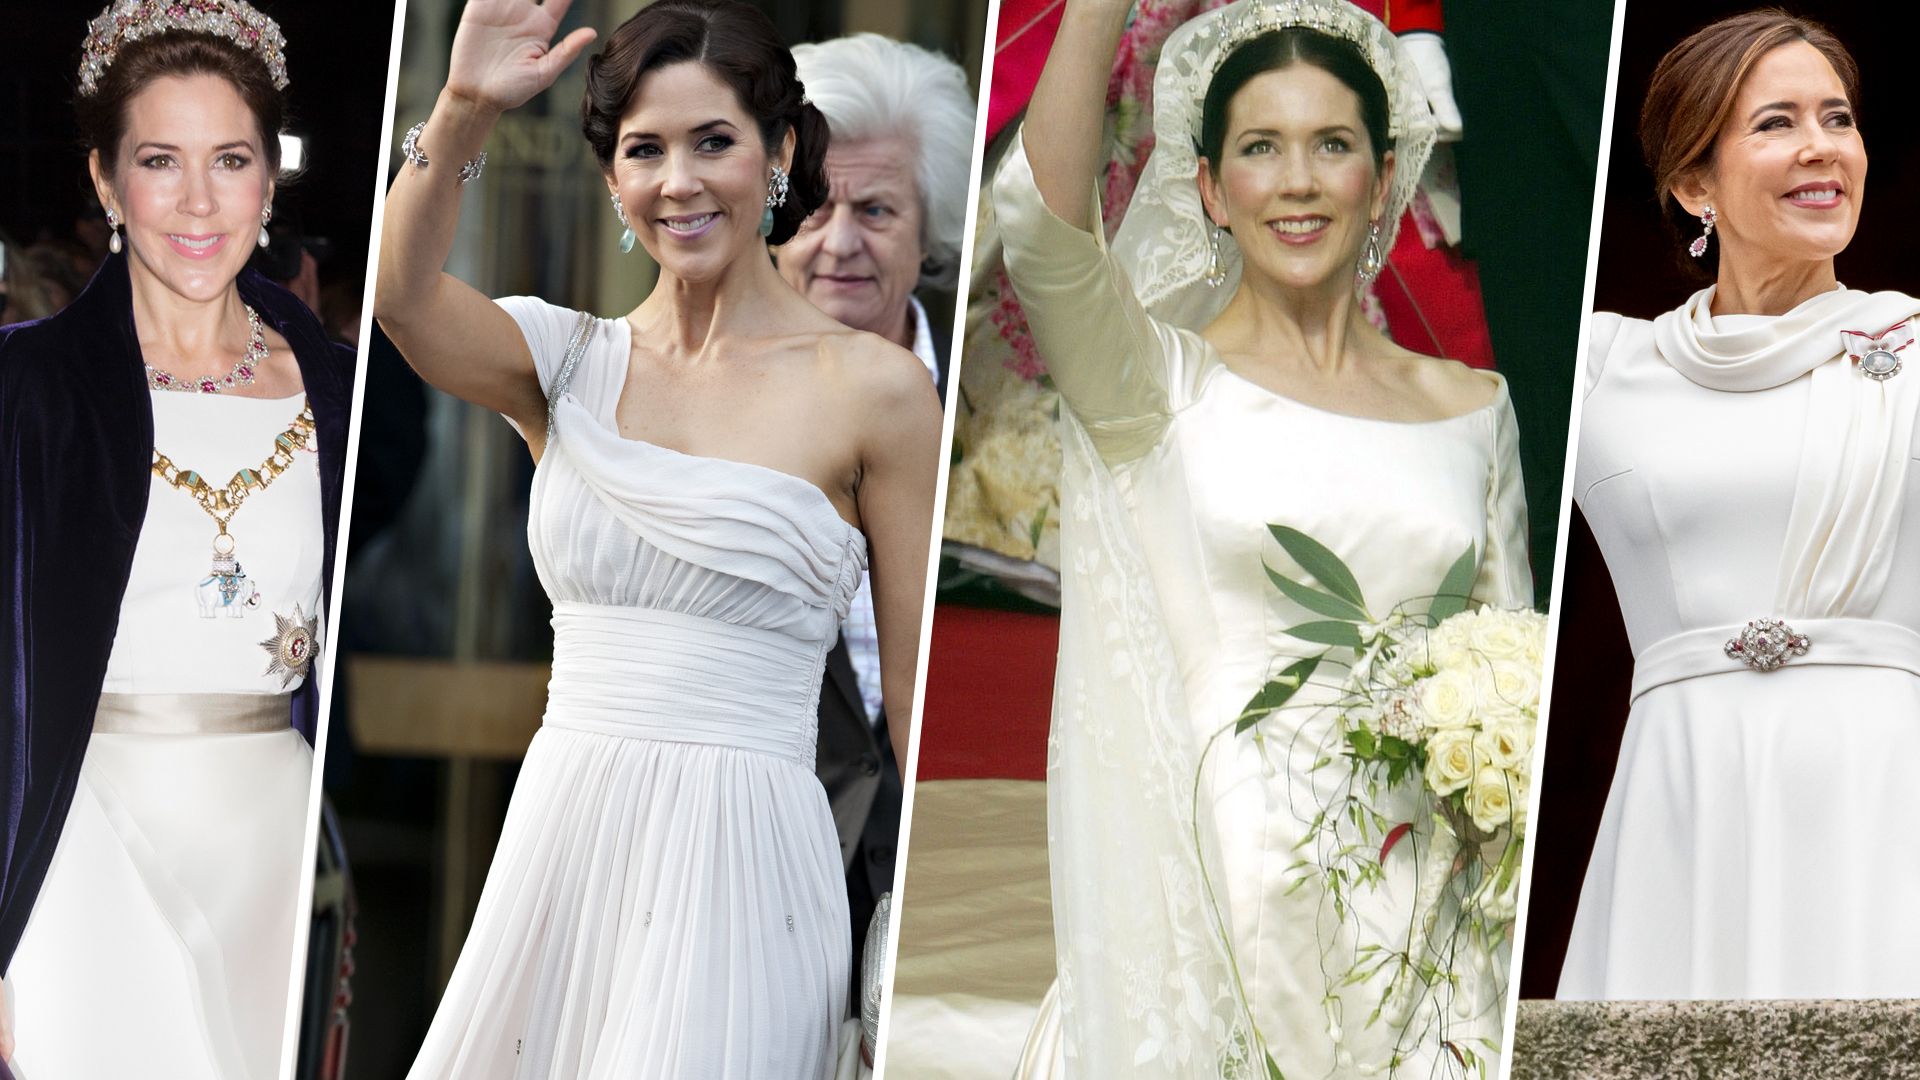 Queen Mary of Denmark in bridal white